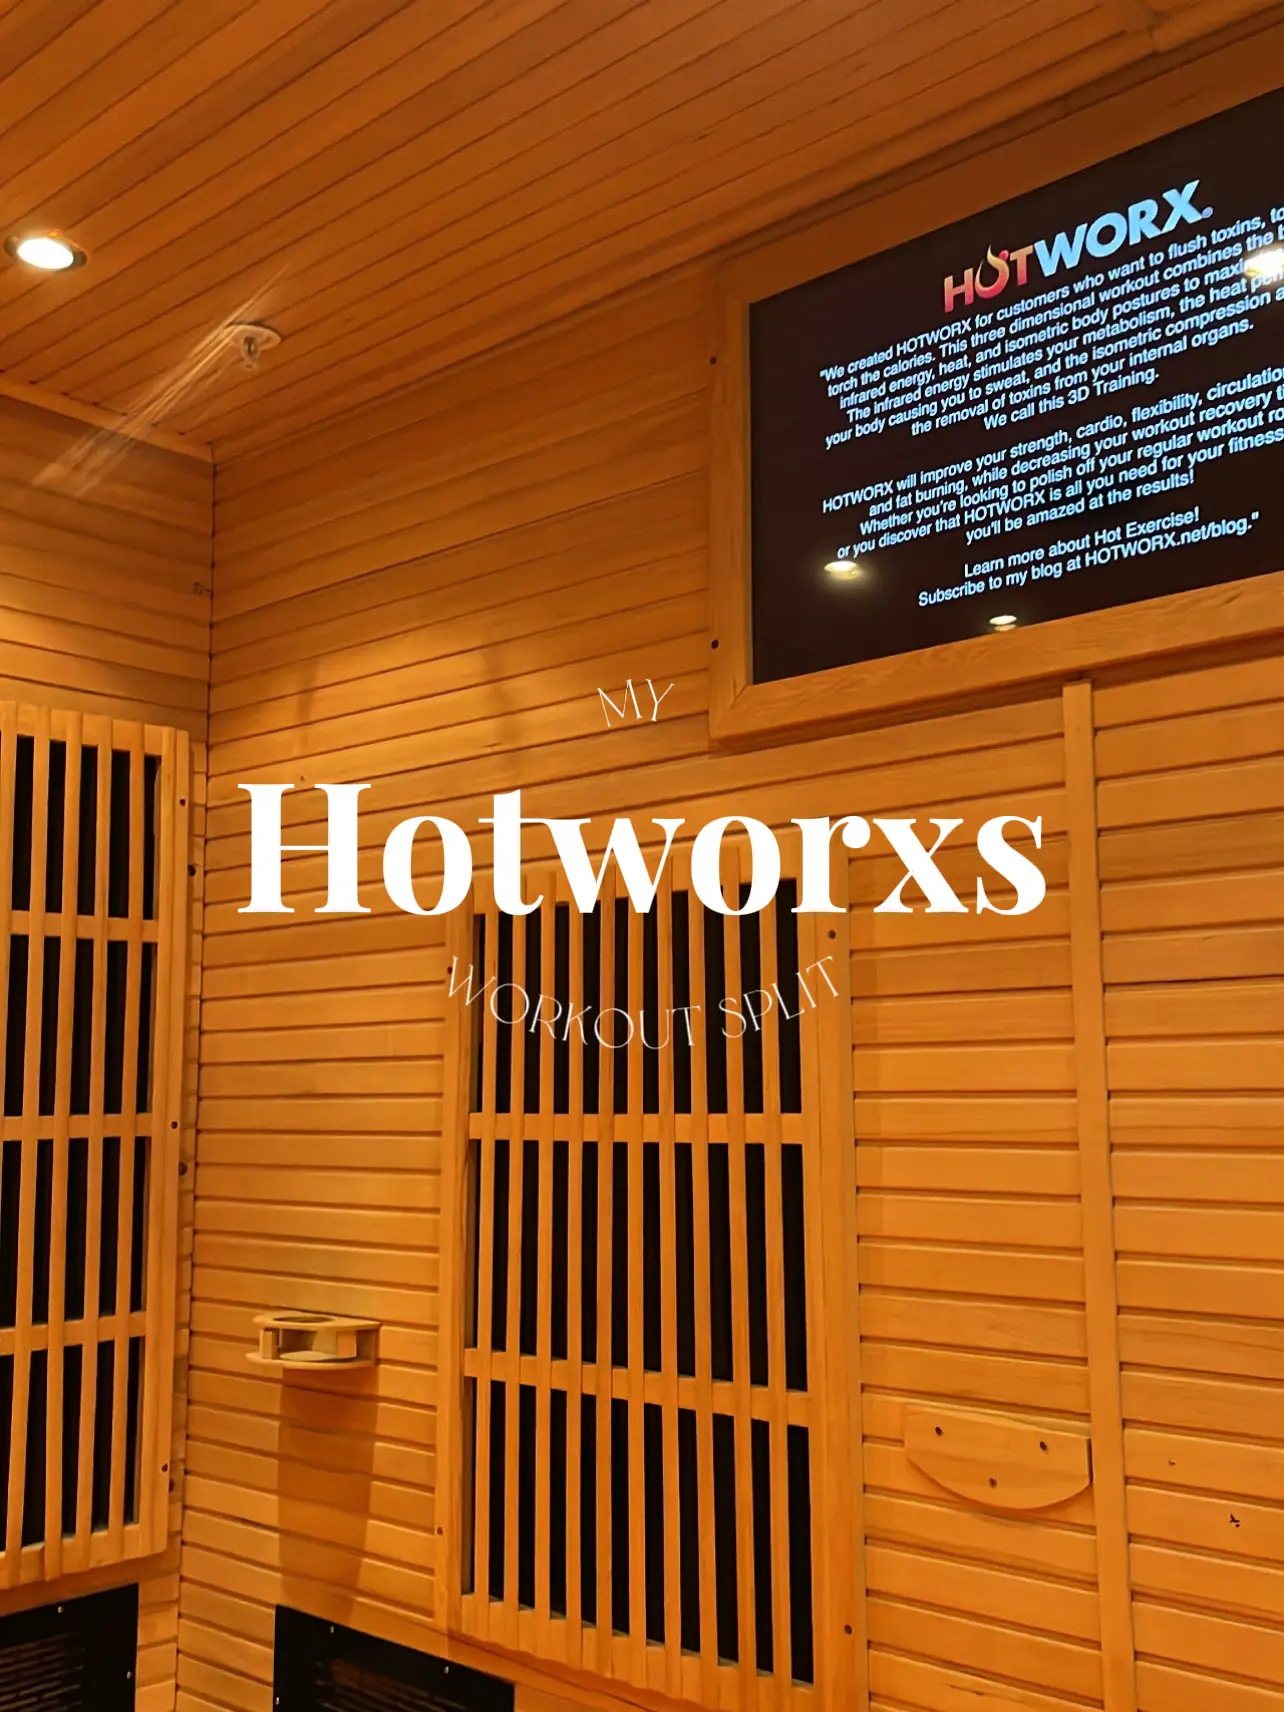 Do you have everything you need for the best HOTWORX Media